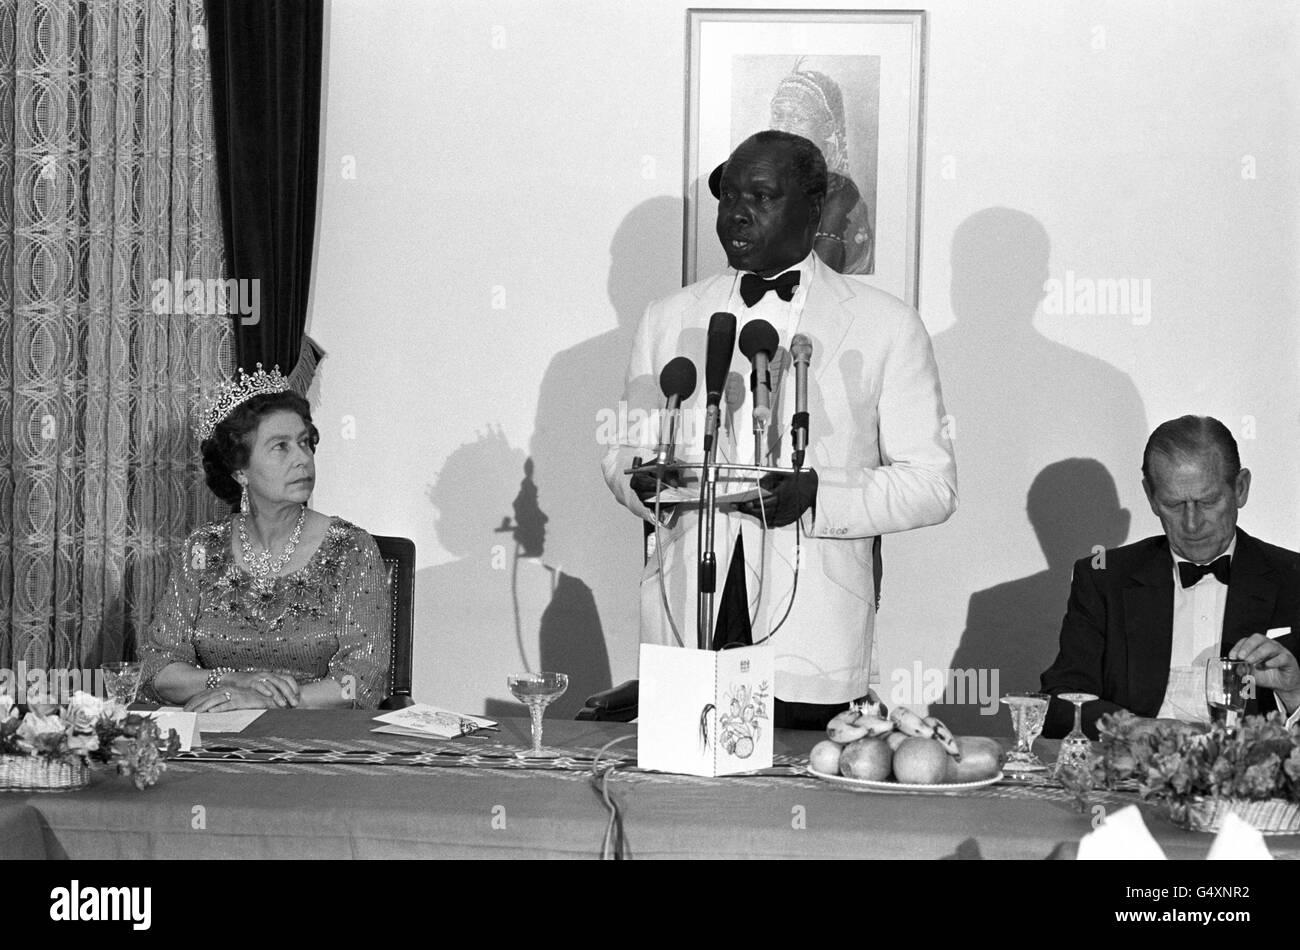 President Daniel arap Moi of Kenya speaking at a State banquet in Nairobi, during the state visit of Queen Elizabeth II. Stock Photo